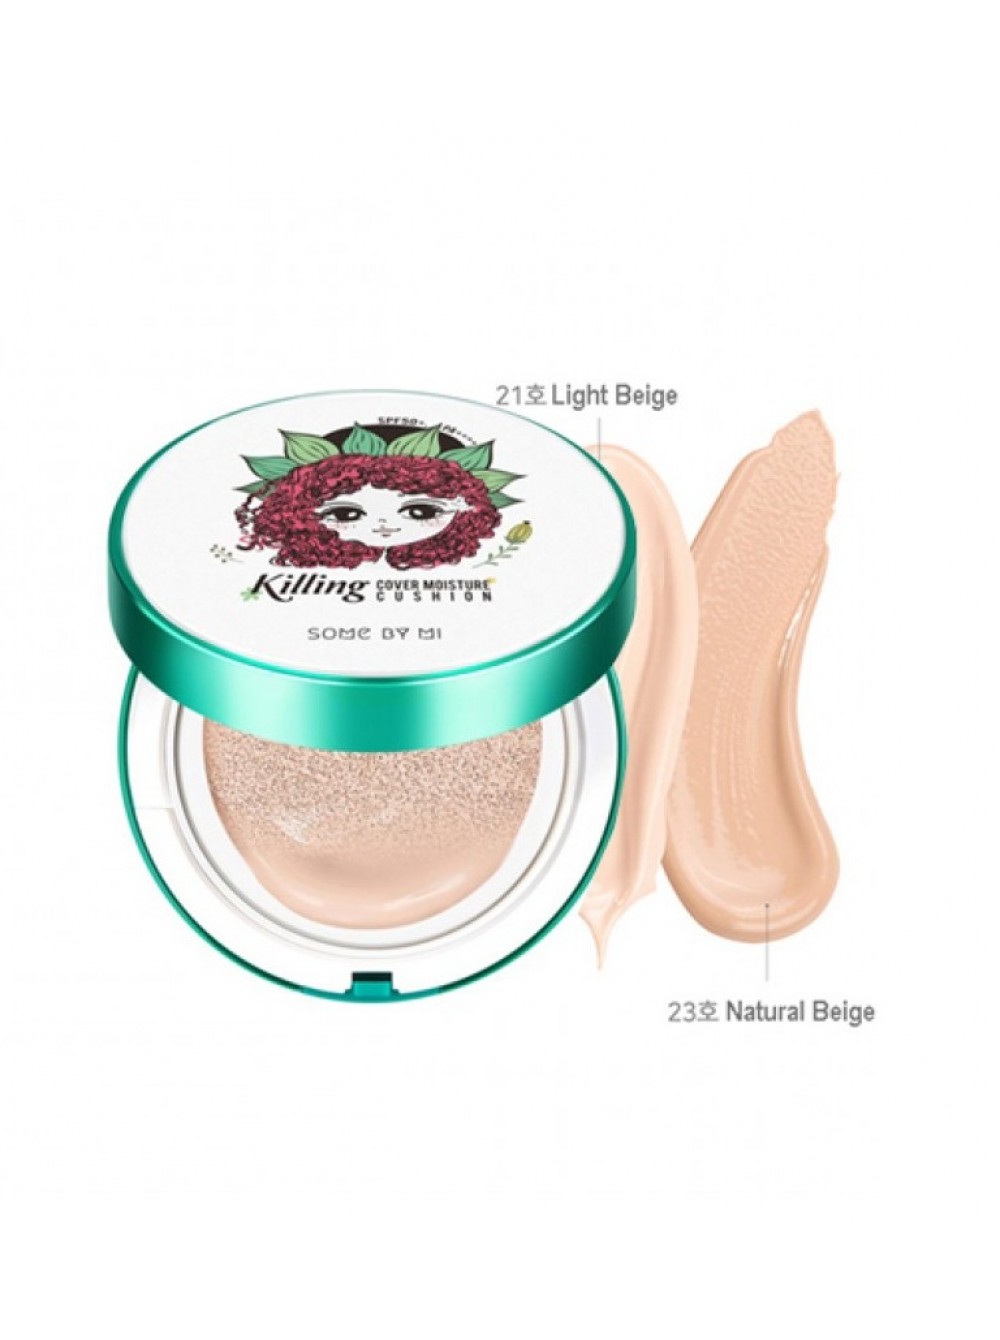 Natural beige. Кушон some by mi. Кушон Killing. Some by mi кушон Killing Cover. Killing Cover Moisture Cushion 2 0.